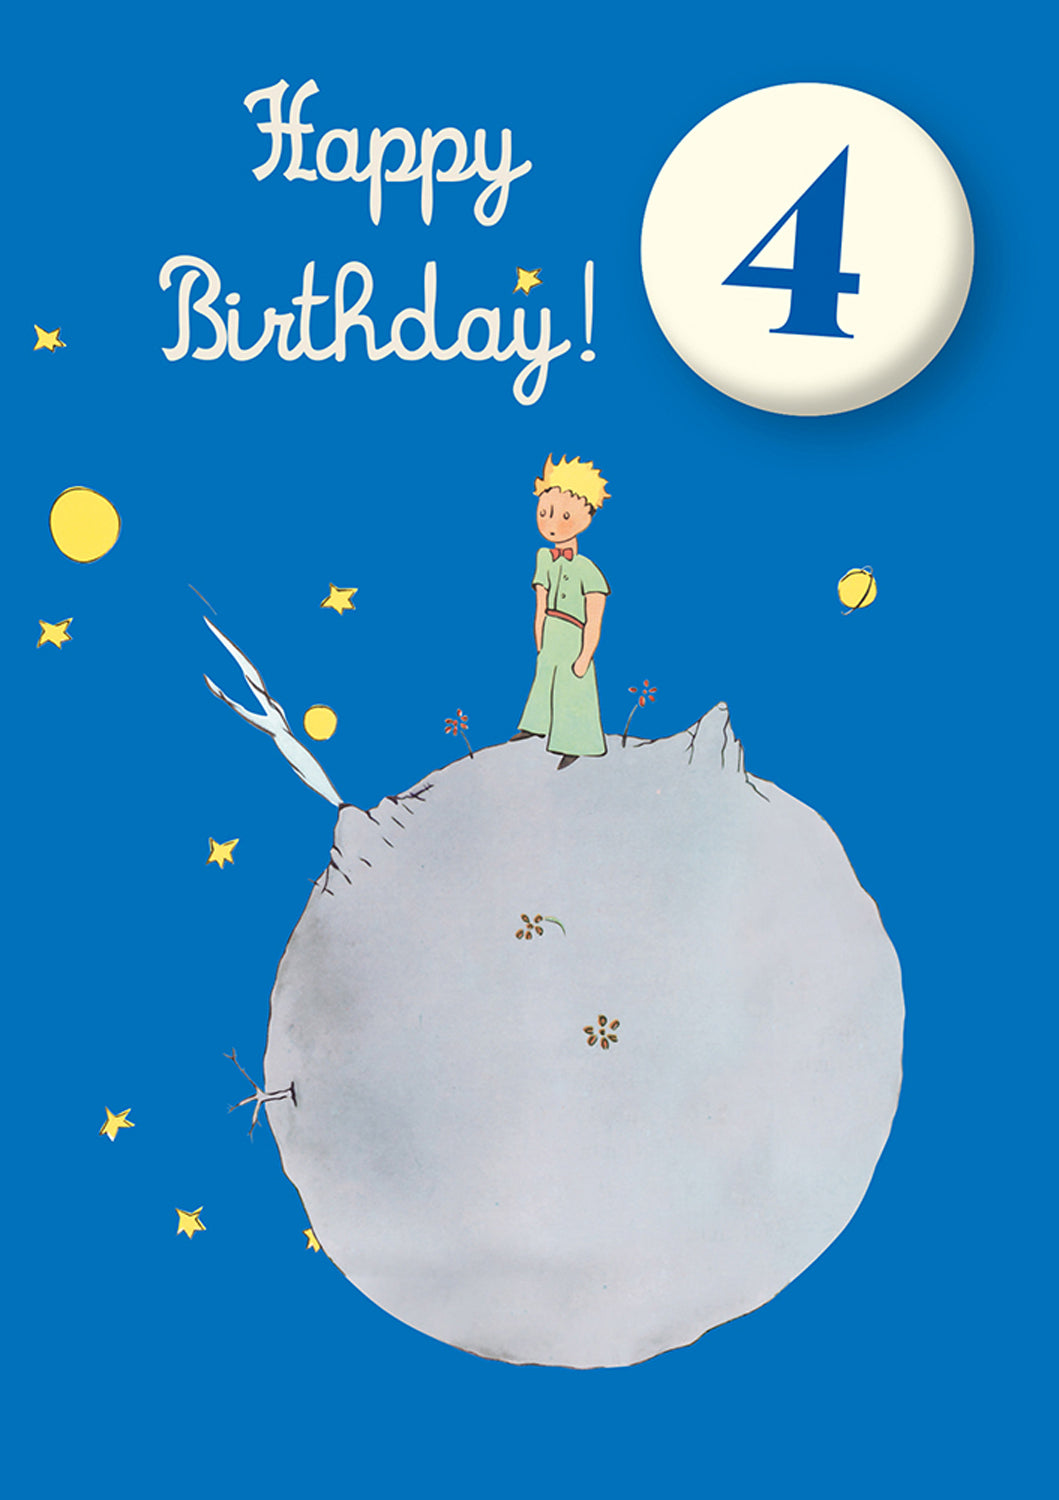 Greeting Card: The Little Prince - Happy Birthday Age 4 Badge